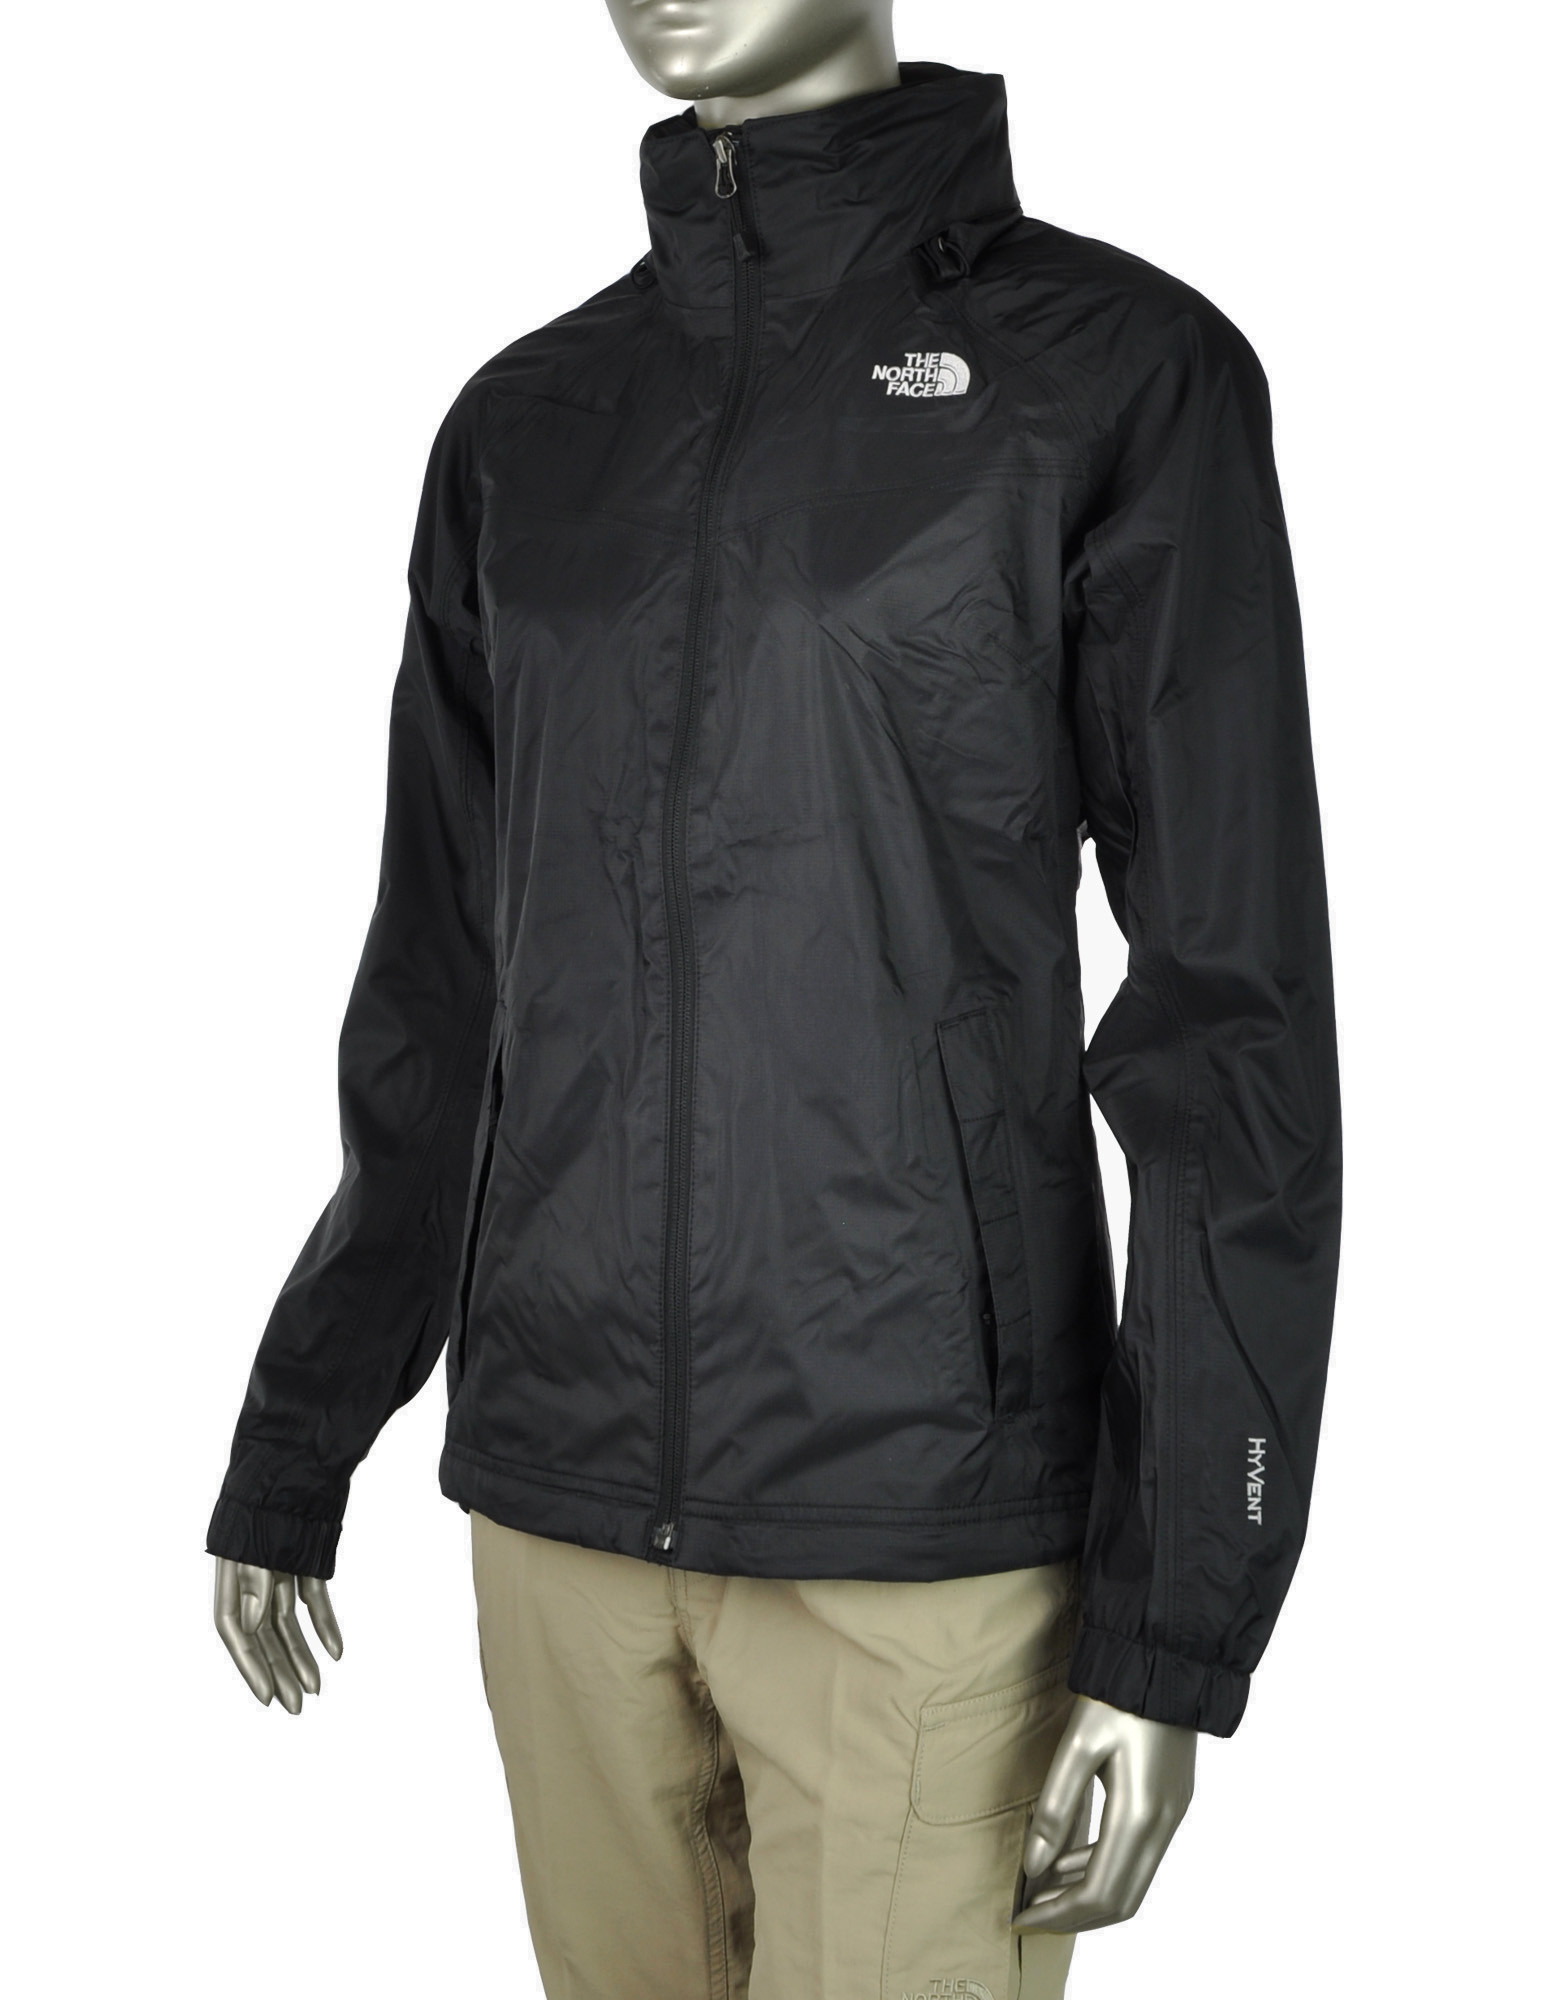 W Potent Jacket by THE NORTH FACE (colour: black)